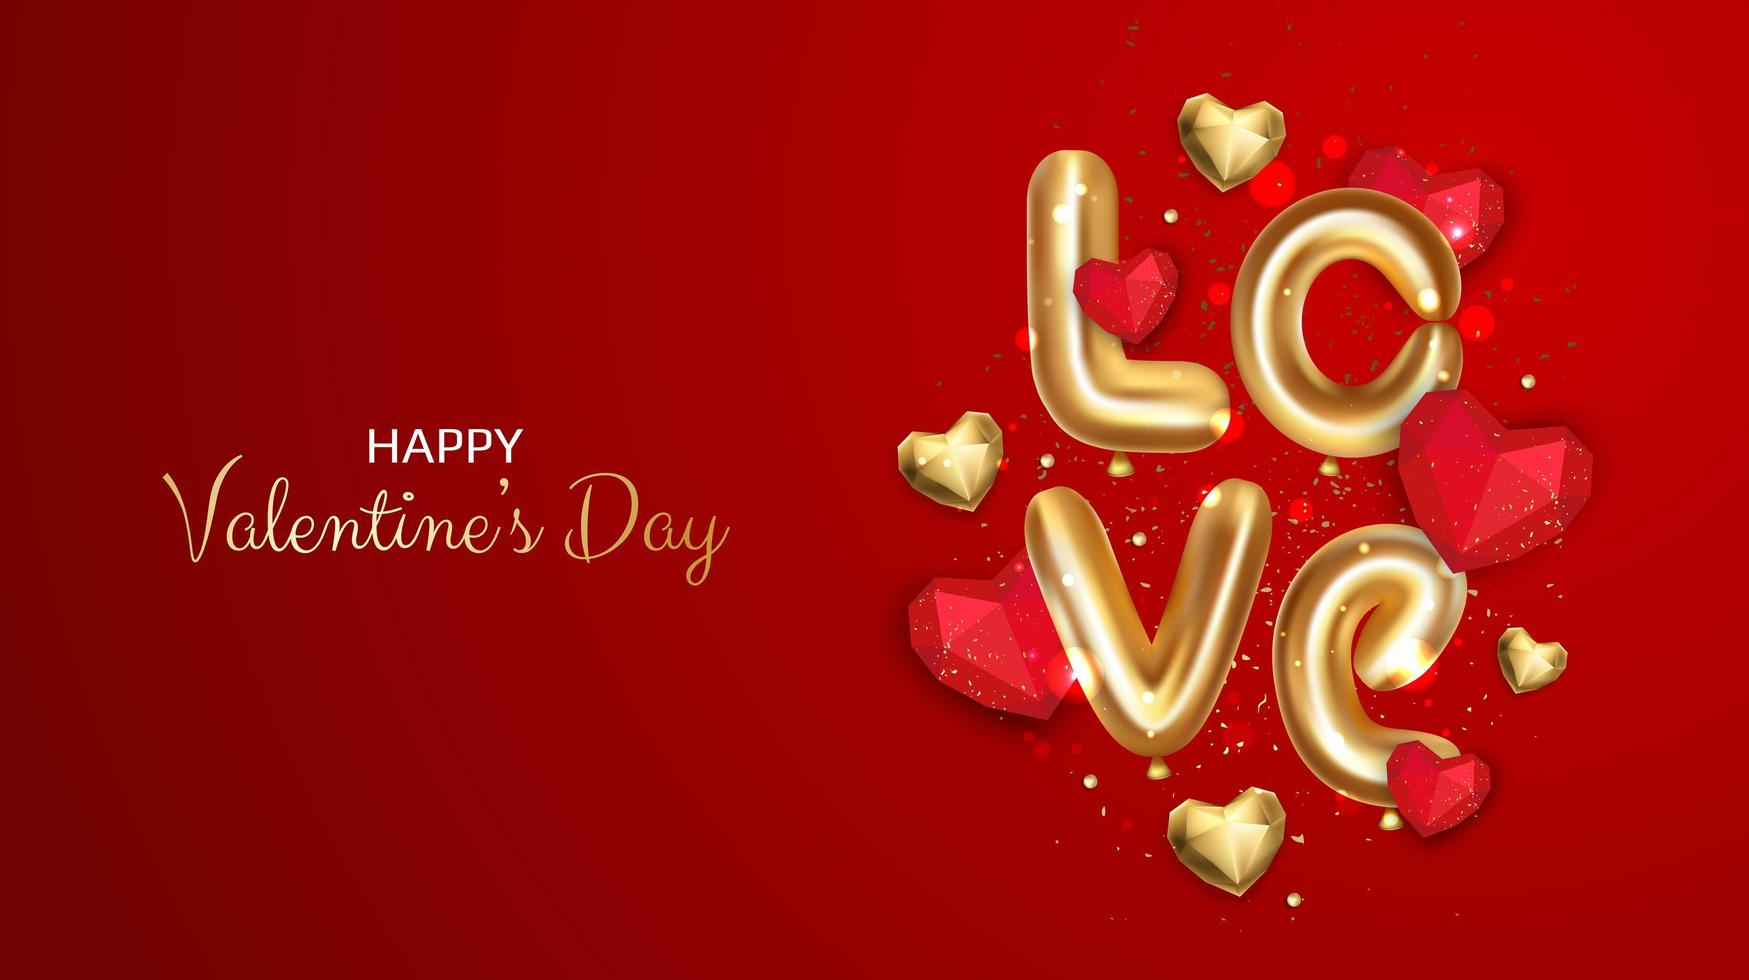 Valentines Day. Romantic Background Realistic 3d festive decorative objects, heart shaped balloons, glitter gold confetti. Holiday web banner vector